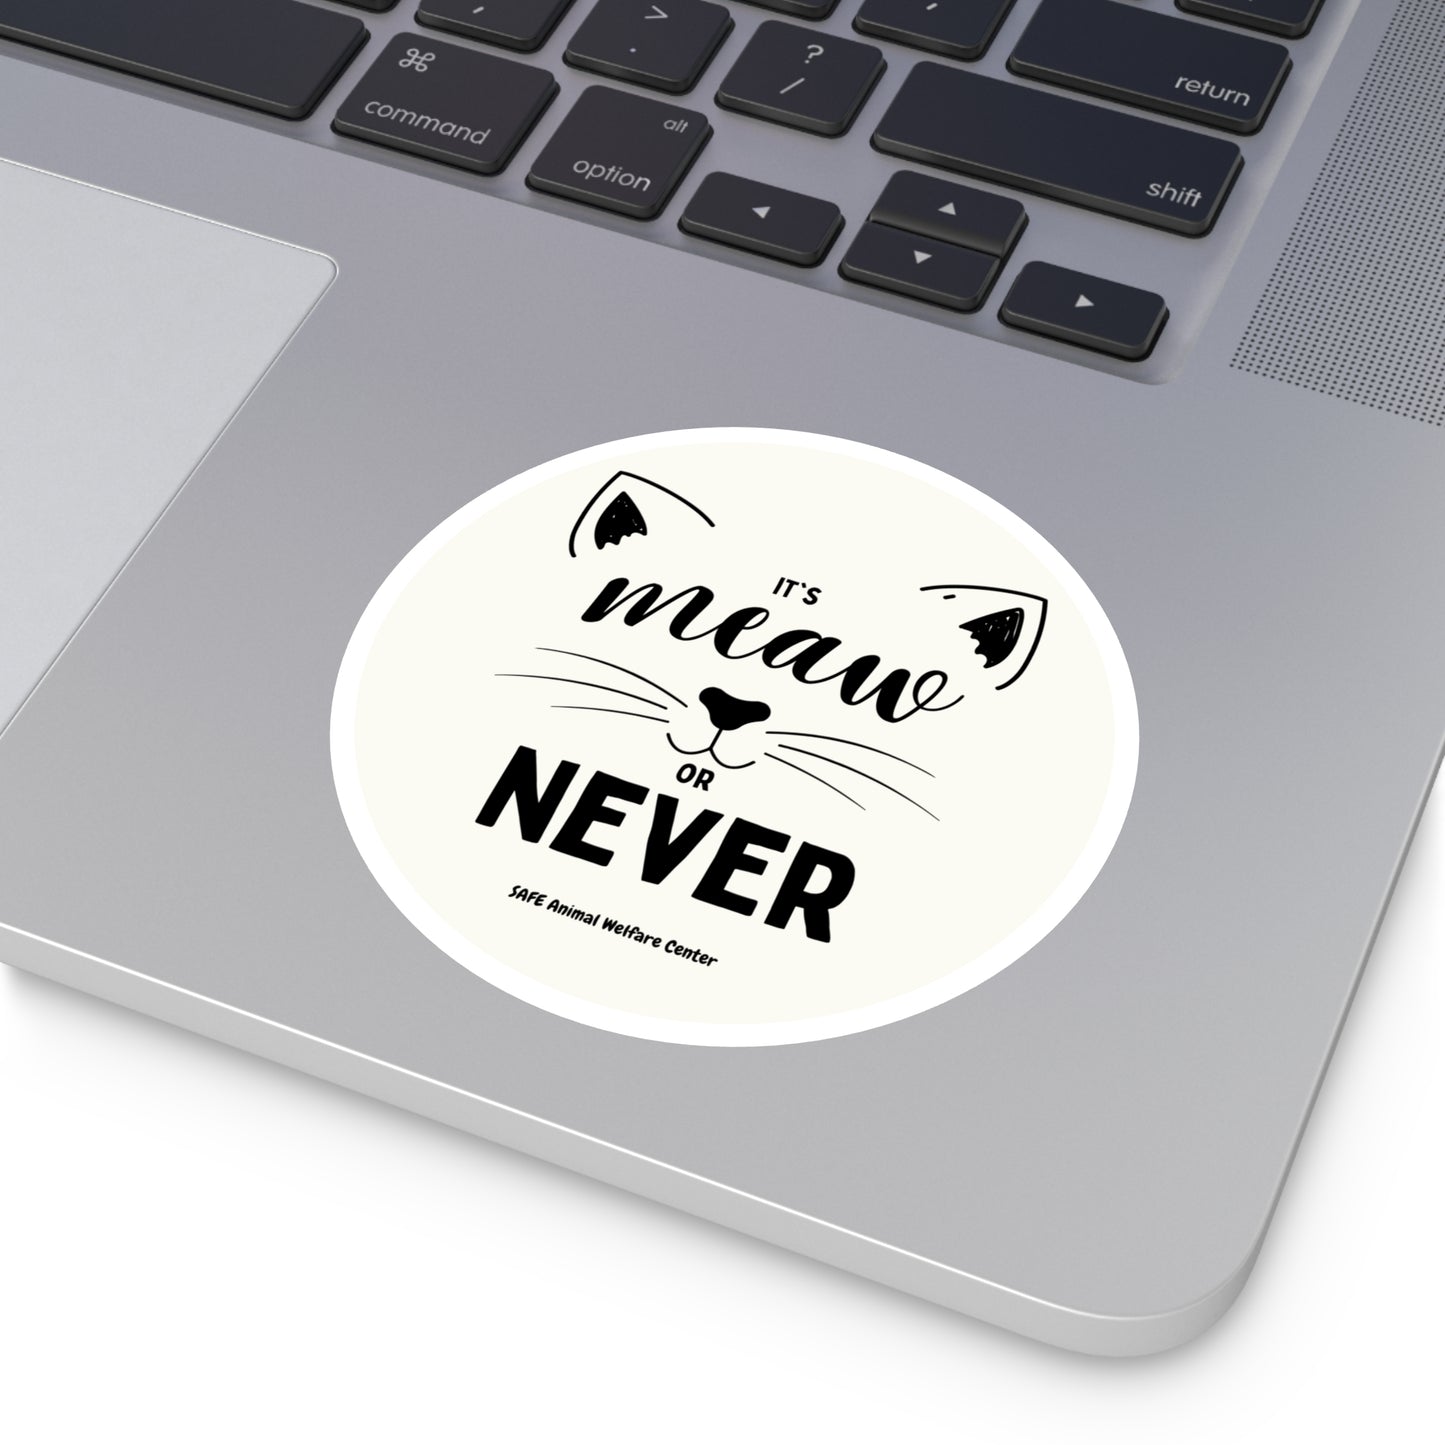 Meow or Never! Round Stickers, Indoor\Outdoor